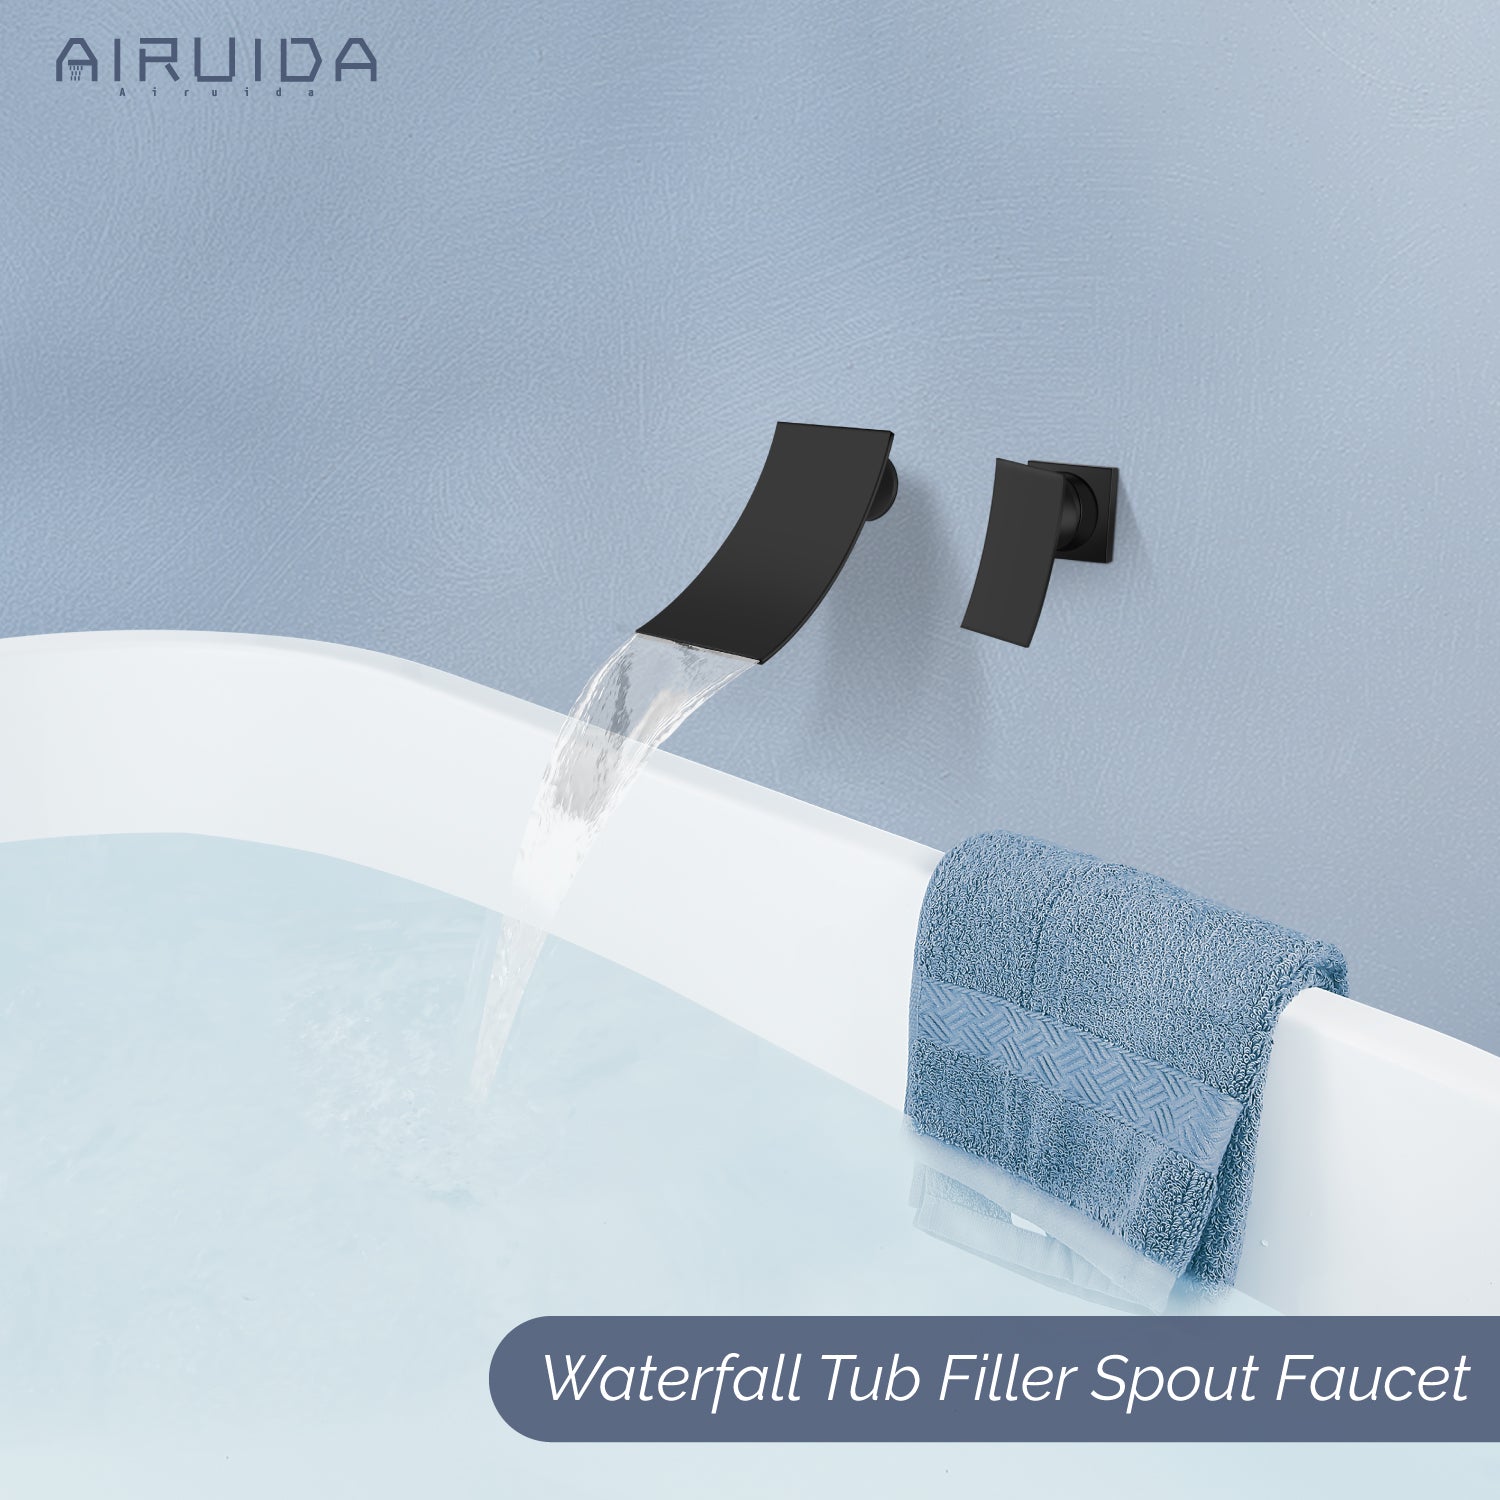 Airuida Wall Mount Wall Mount Bathtub Faucet, Tub Filler with Waterfall Tub Spout, Single Handle Bathroom Mixer Tap Brass Rough-in Valve Included